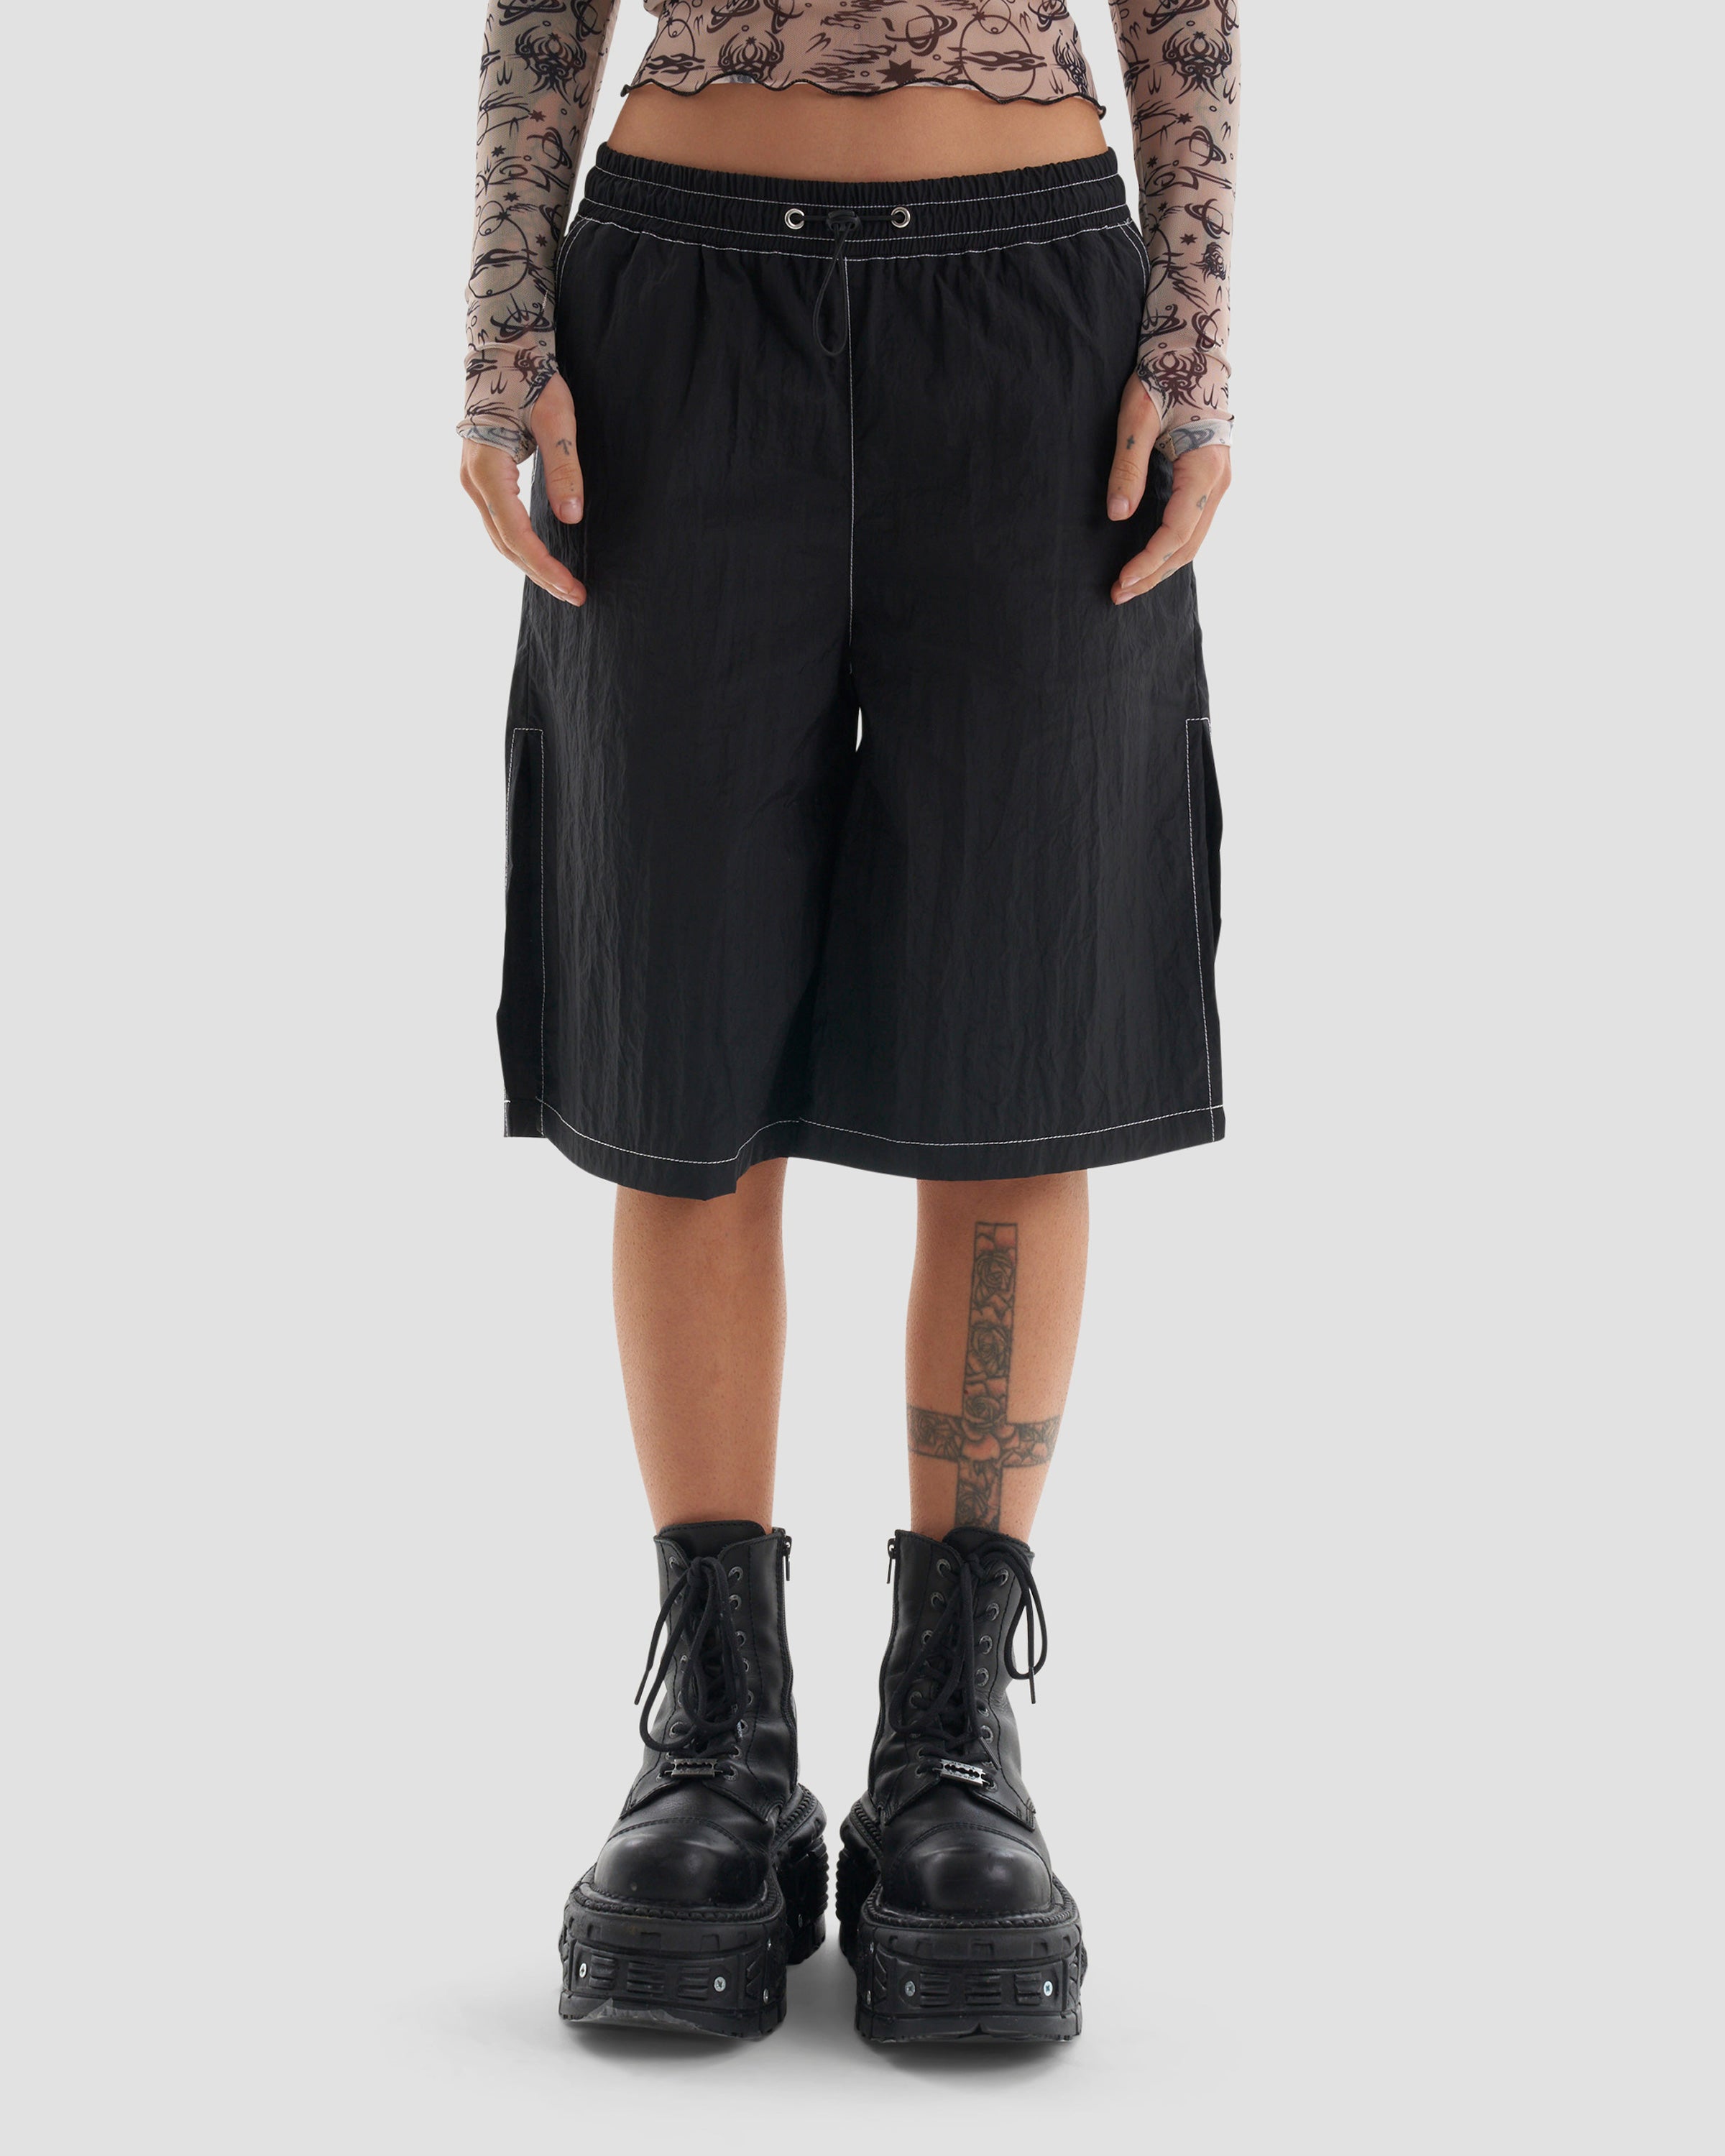 Play Harder Oversized Parachute Basketball Shorts with Tattoo Print in Black